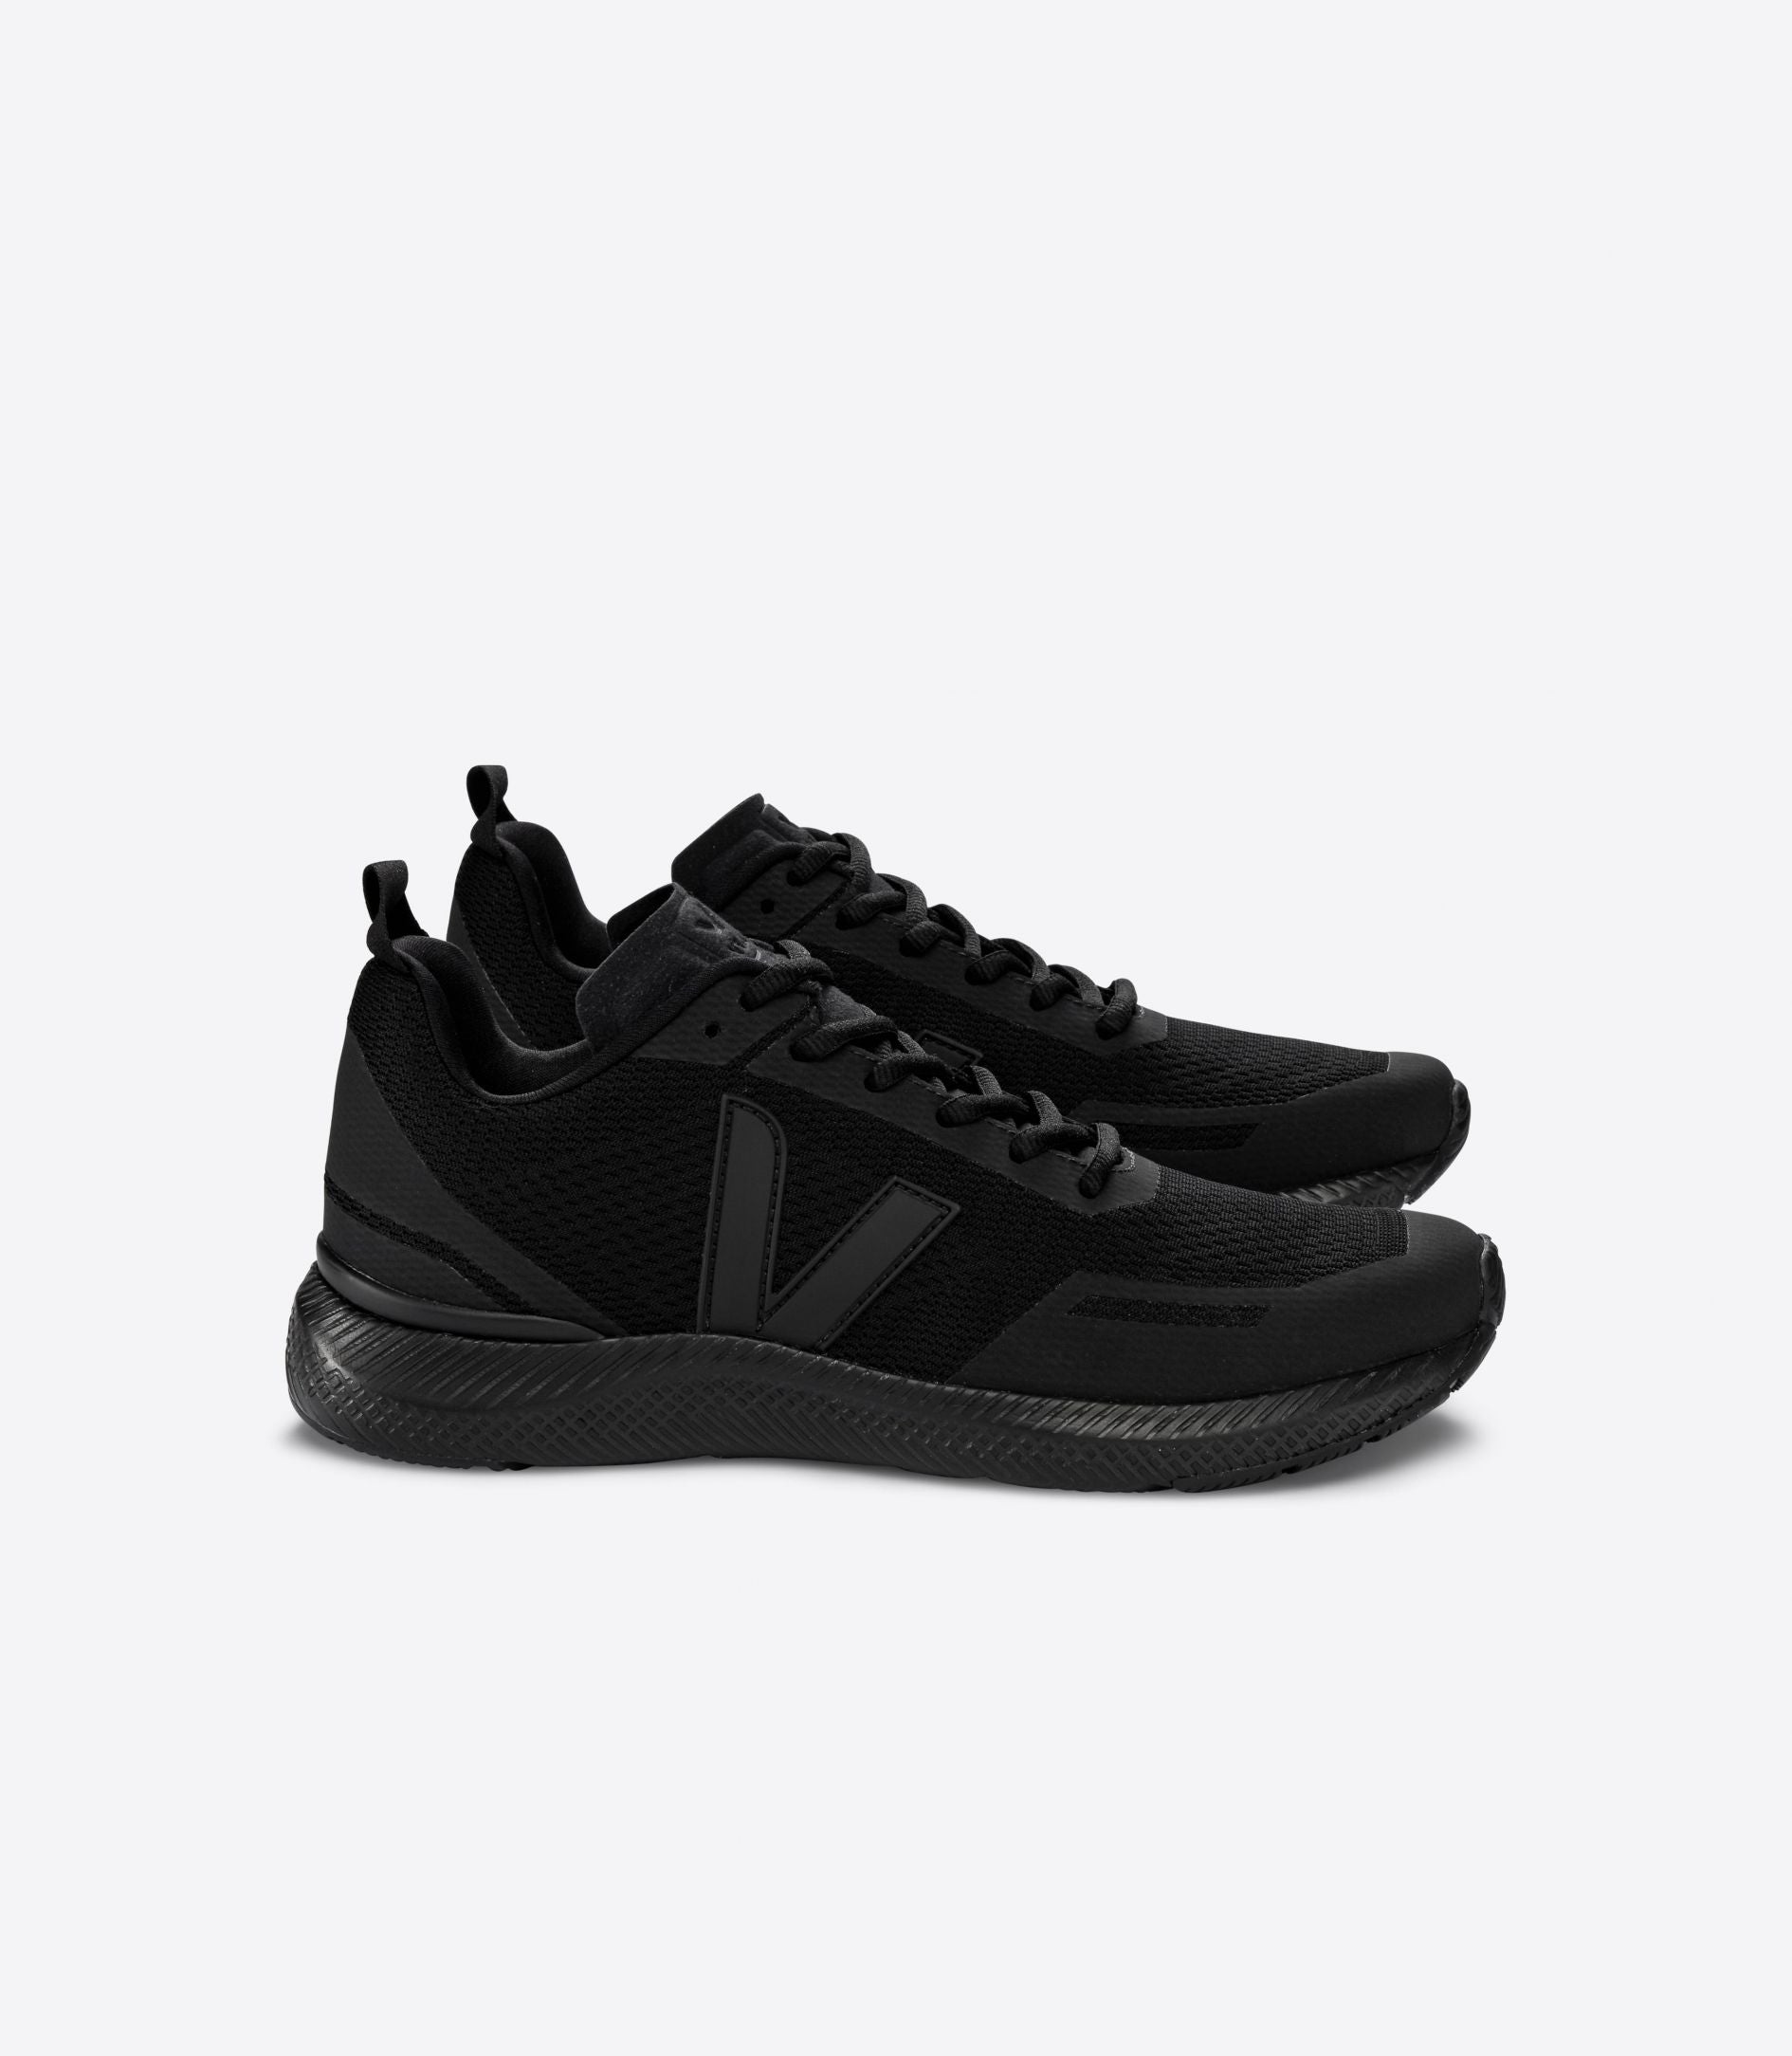 Lateral view of a pair of Women's Impala's by VEJA in all black